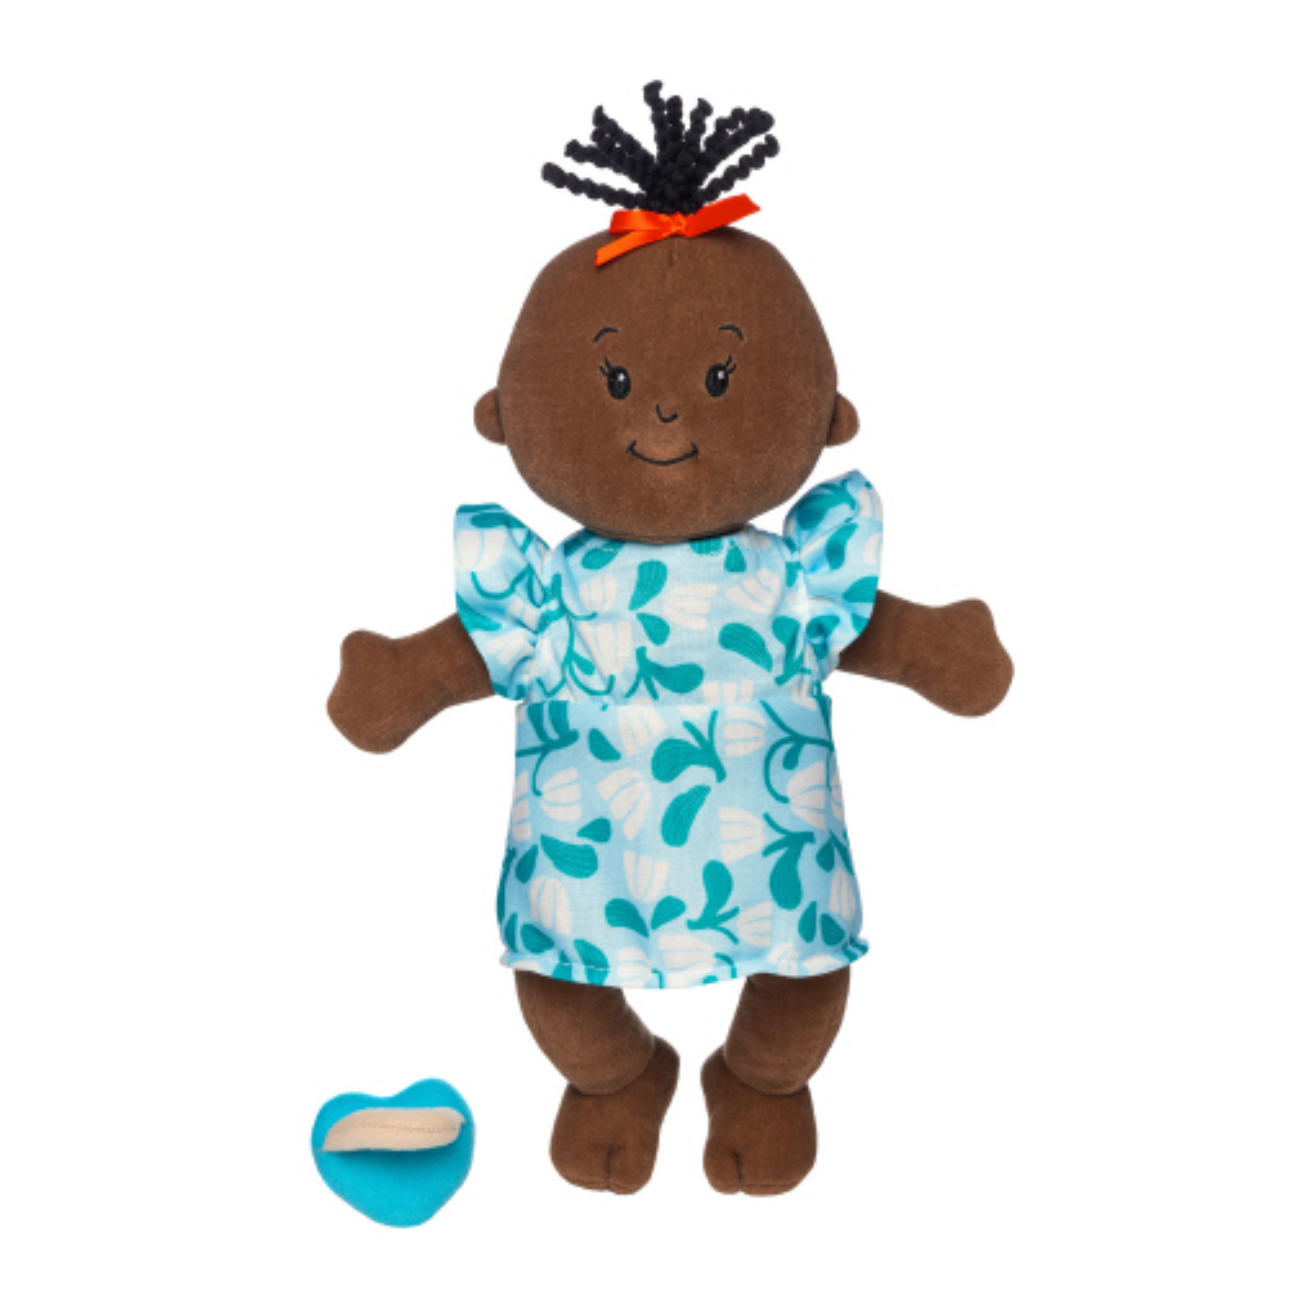 Manhattan Toy Wee Baby Stella Brown Doll with Black Wavy Hair - Turquoise Dress